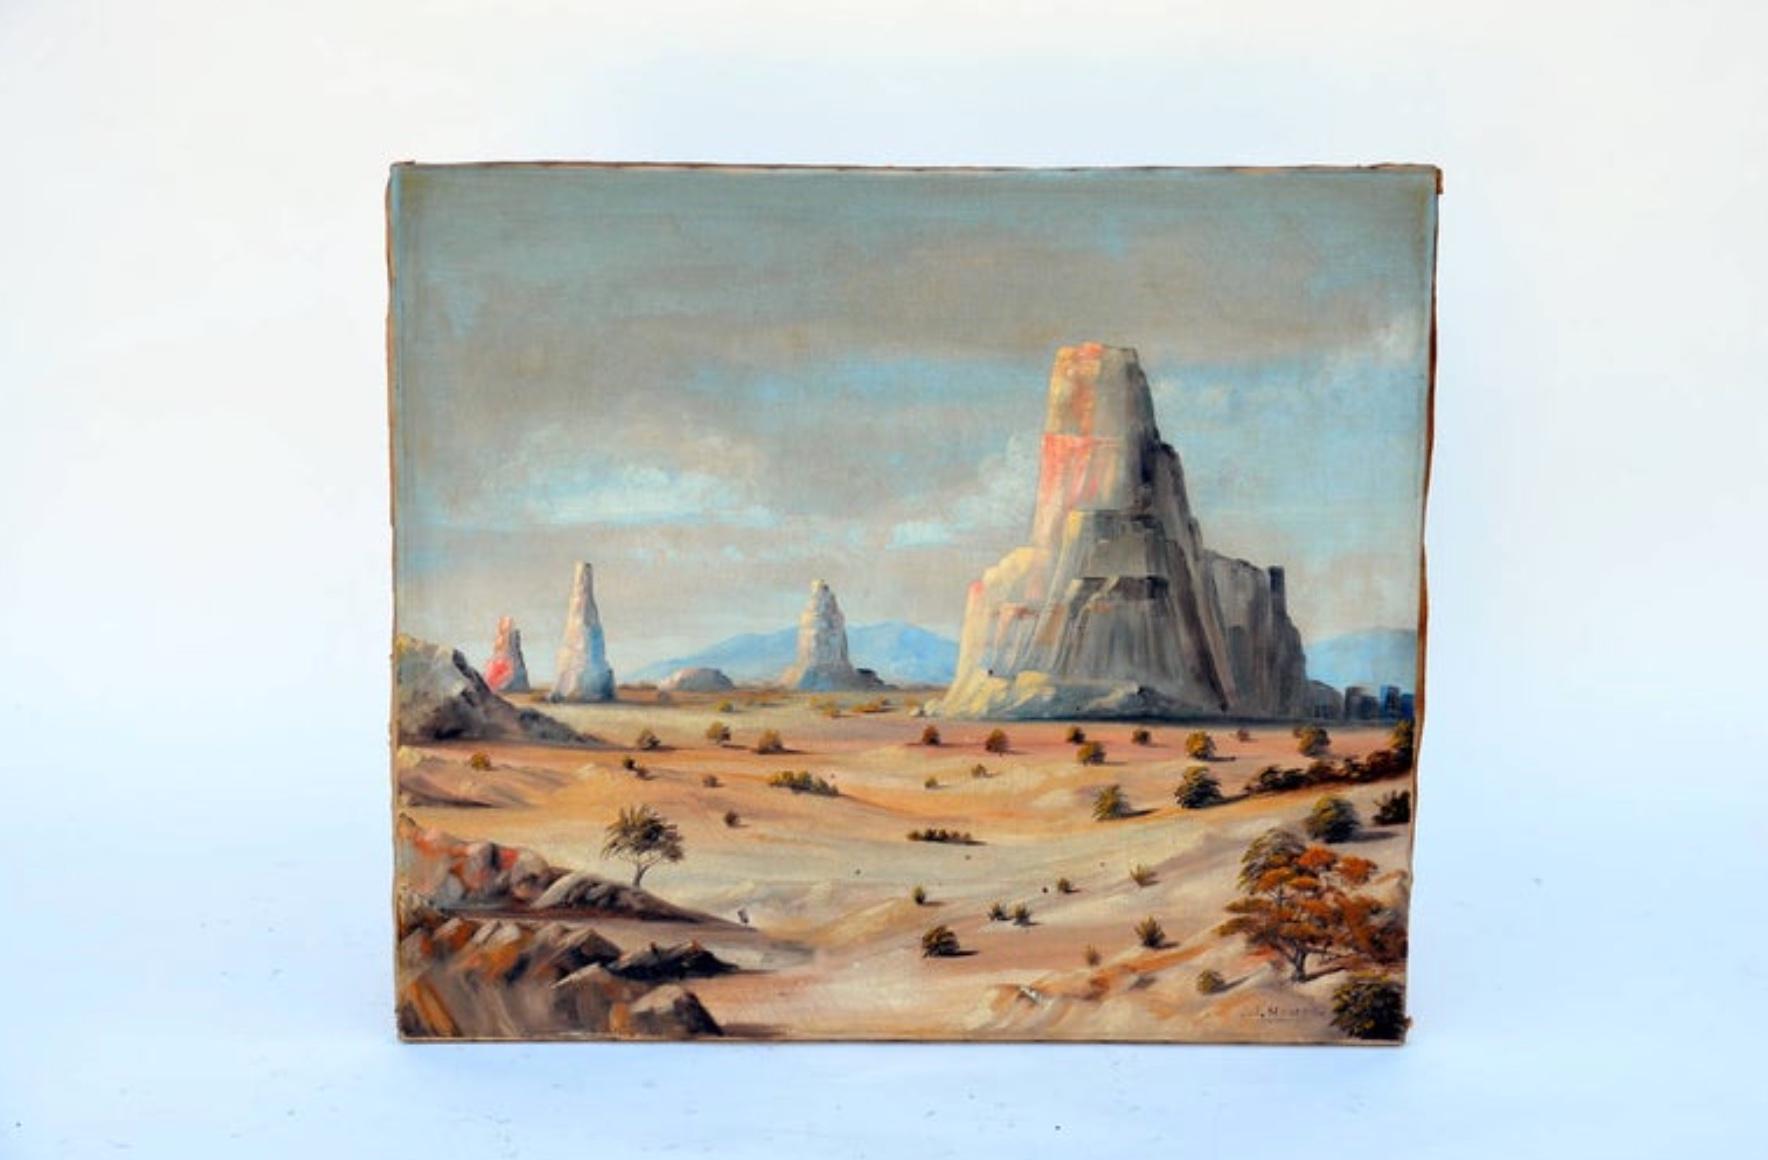 Monument valley oil on canvas, circa 1930. Signed J. J. Moreno.